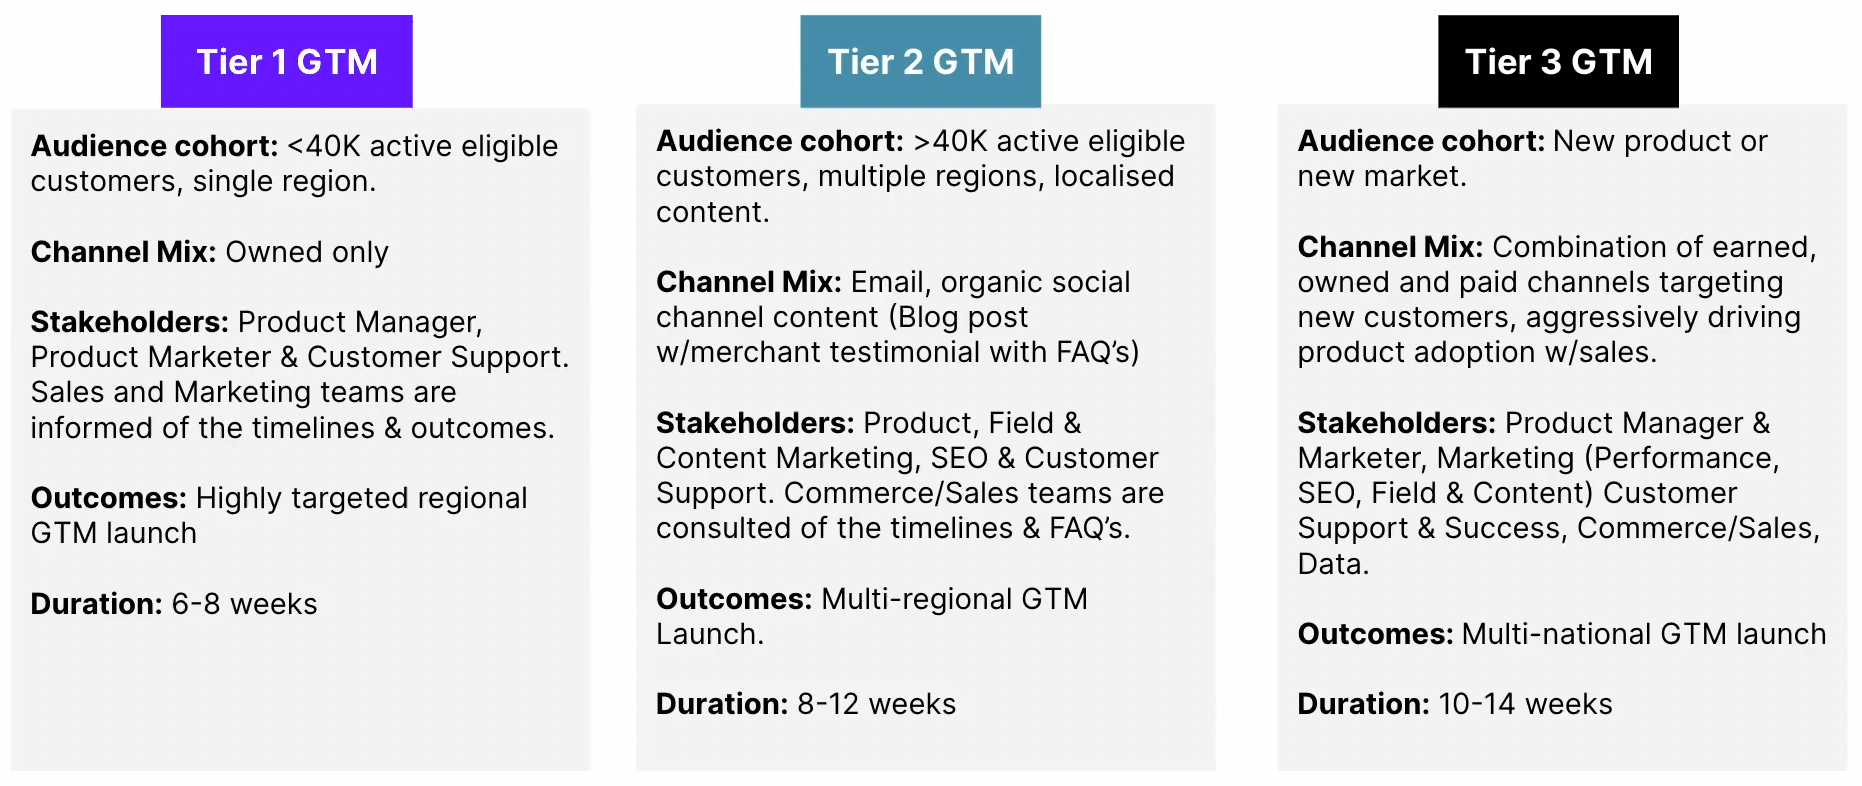 Three tiers to GTM